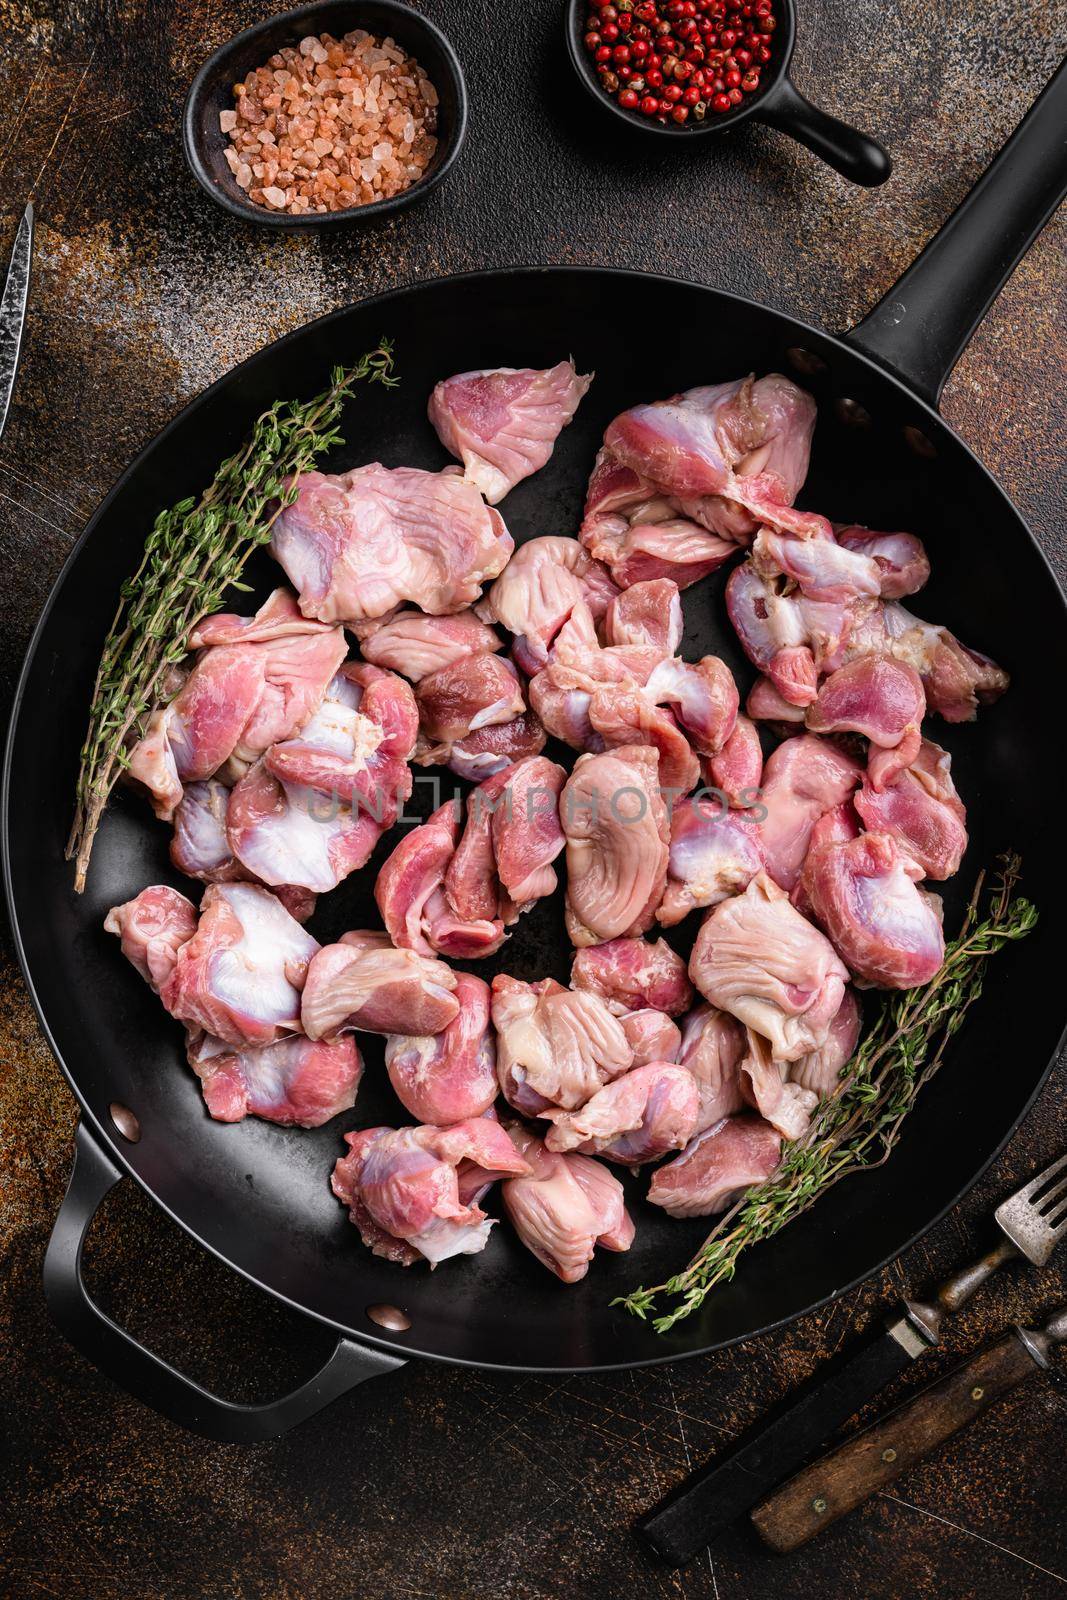 Bird turkey giblets gizzards stomachs. Raw uncooked meat set, on old dark rustic table background, top view flat lay